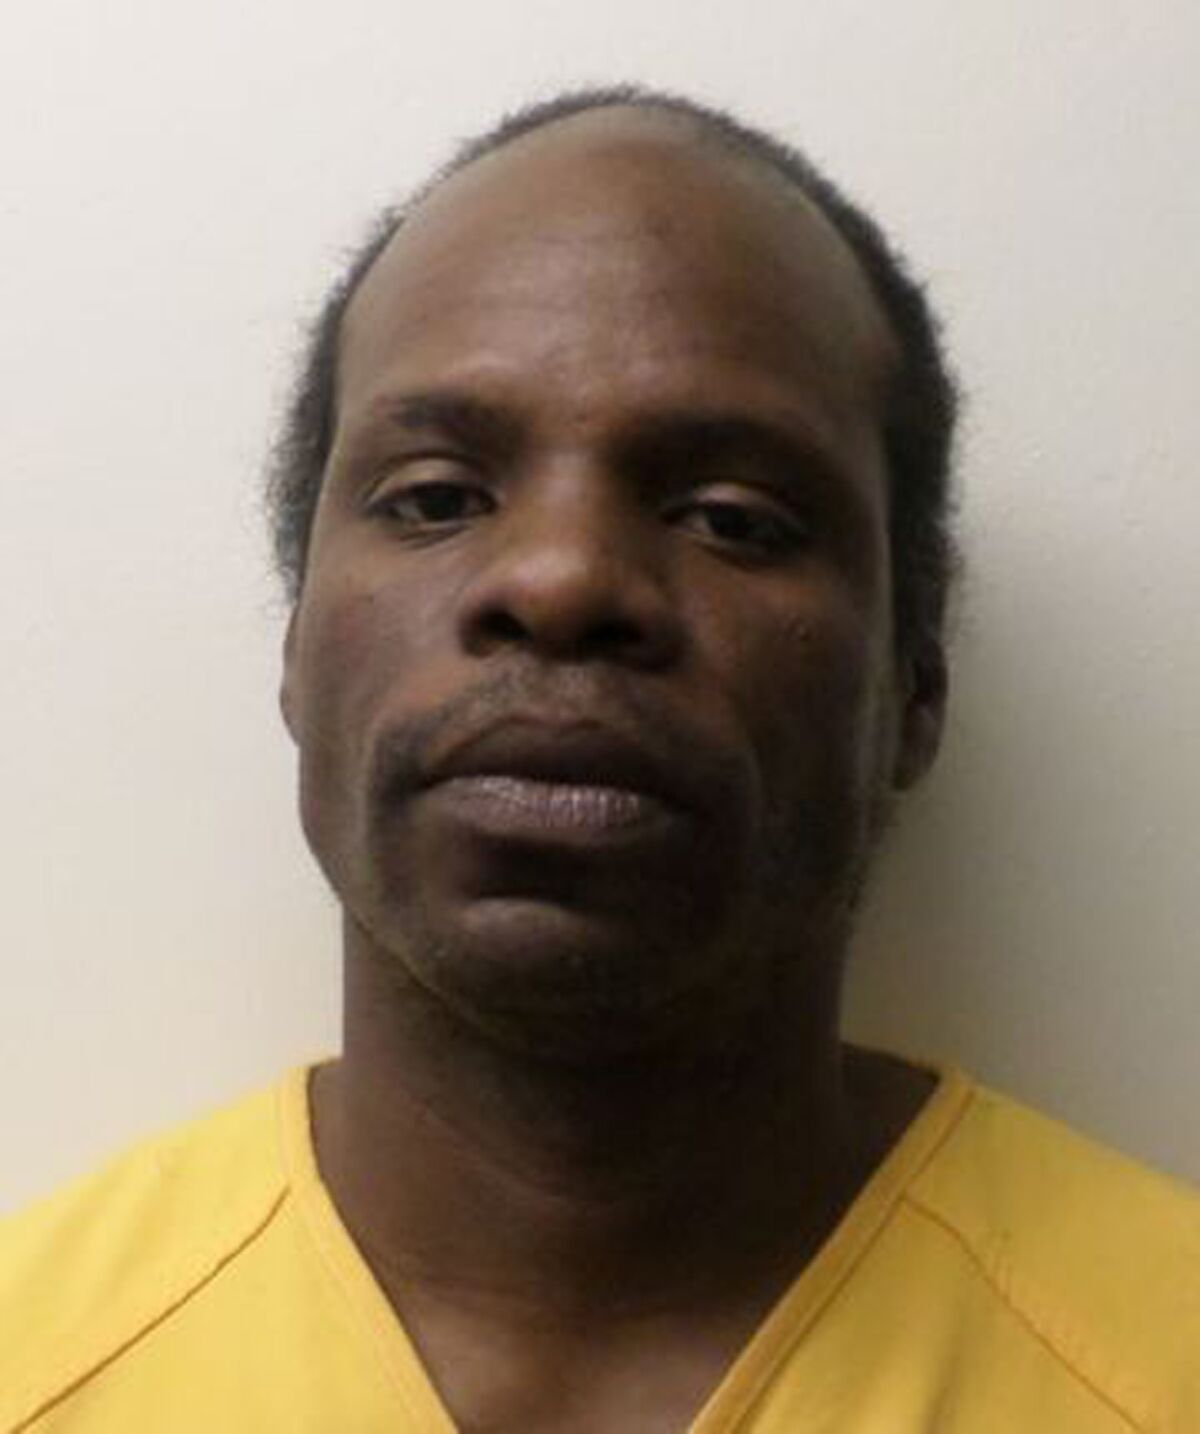 This Oct. 4, 2017, image provided by the Oklahoma Department of Corrections is of Gregory Thompson, 49, who is accused of killing a prison guard in Oklahoma. The attack happened Sunday, July 31, 2022, at the Davis Correctional Facility, which is a privately run prison in Holdenville about 70 miles (115 kilometers) southeast of Oklahoma City. (Oklahoma Department of Corrections via AP)